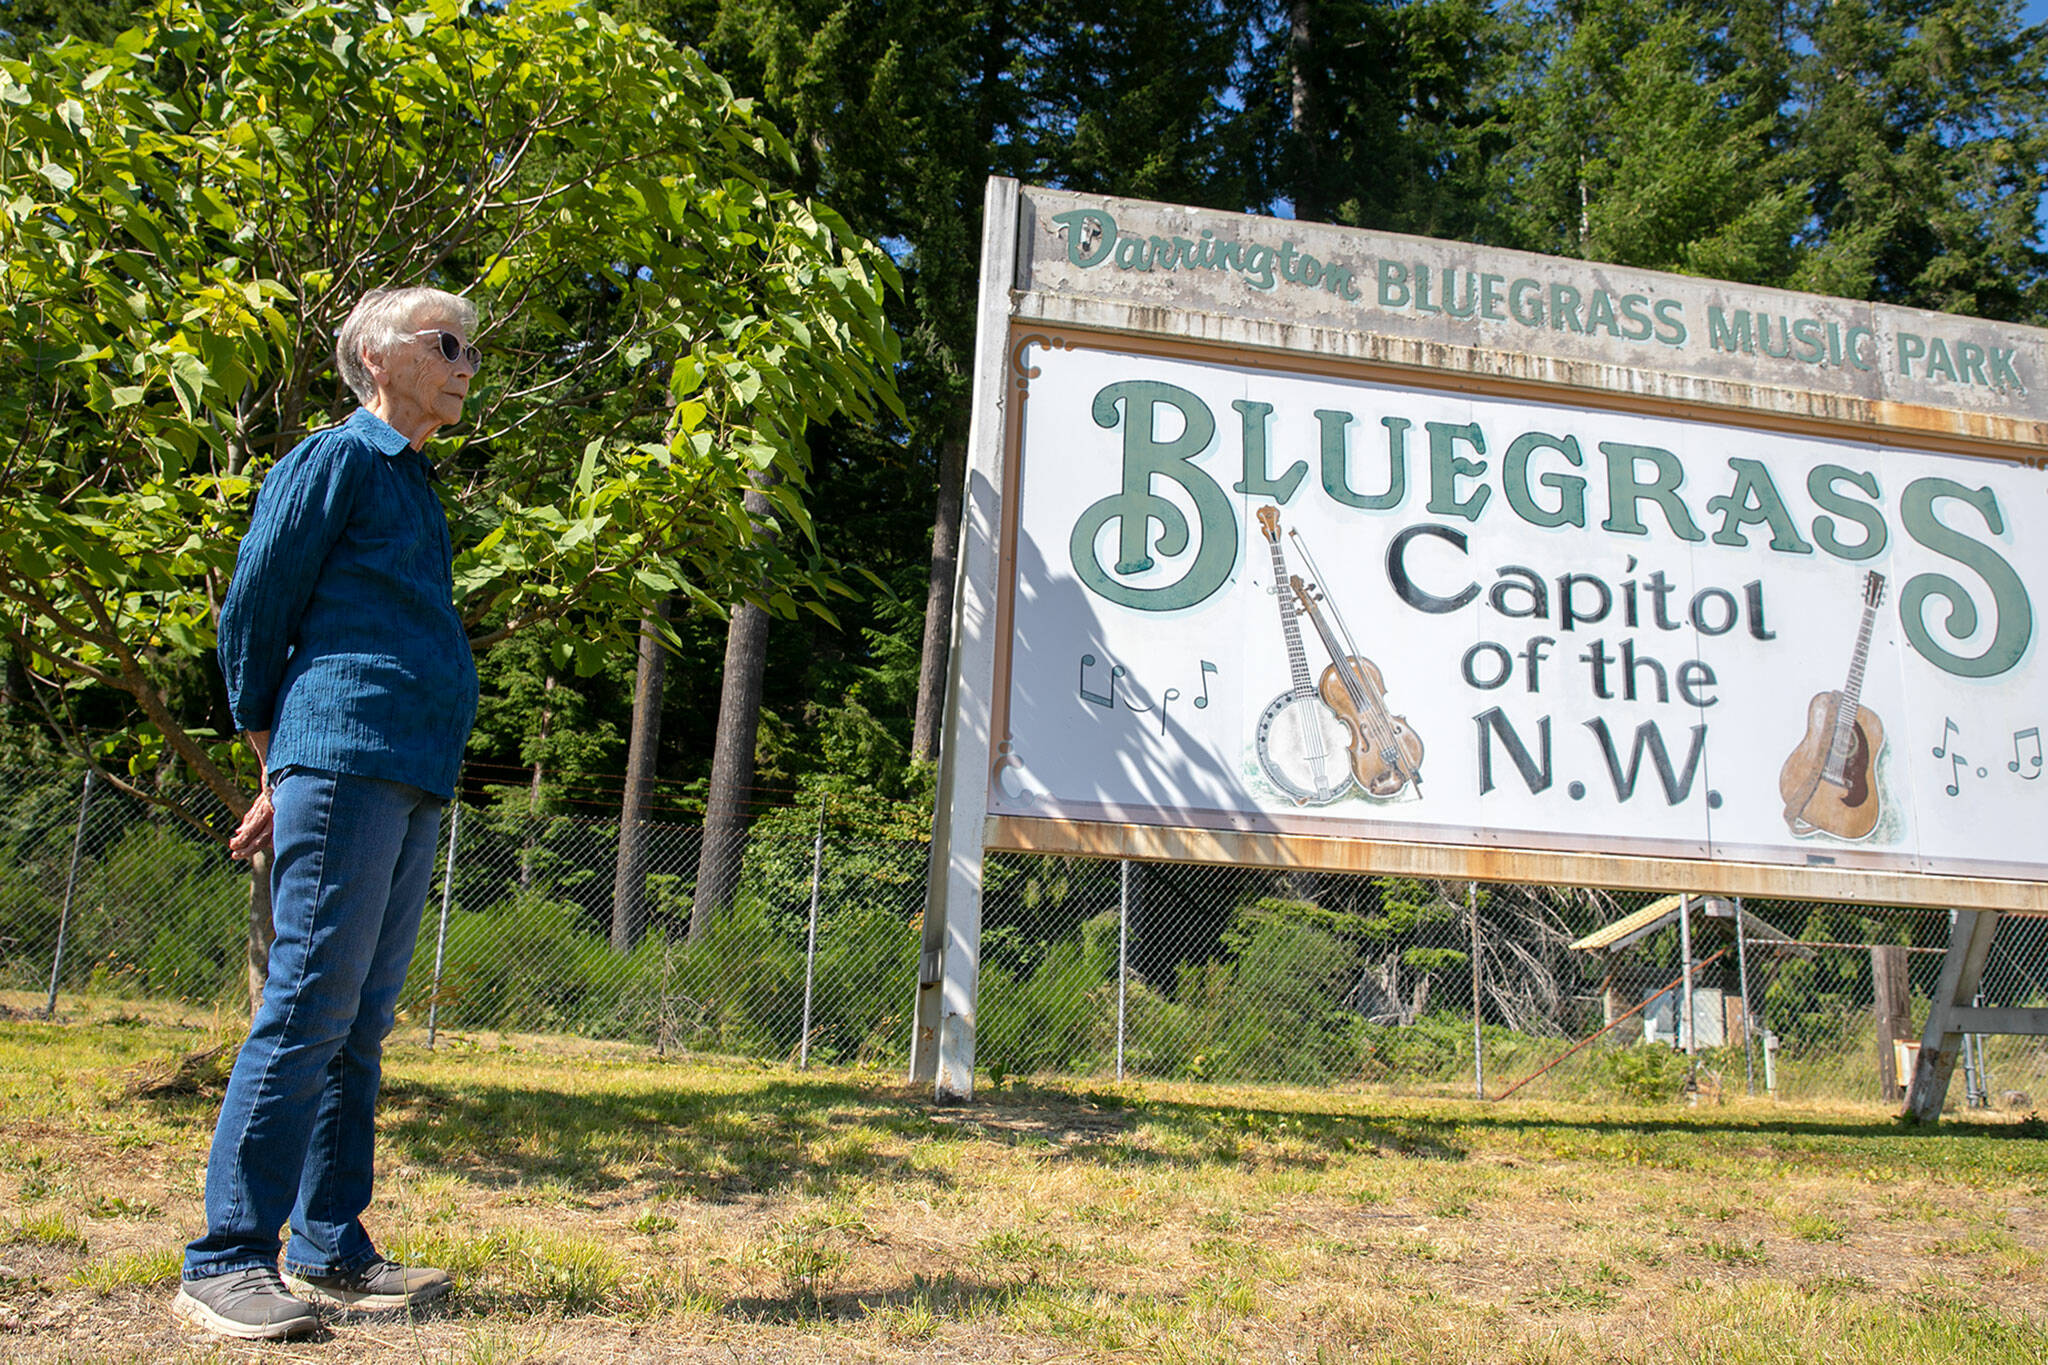 Ninety-year-old Ernestine Jones, who is one of the founders of the Darrington Bluegrass Festival, stands near the festival sign on Wednesday, at Darrington Bluegrass Music Park in Darrington. Jones planted the tree seen behind her in hopes of shading the sign and a nearby ticket booth from the sun, but it’ll be a few more decades before that hope comes to fruition. (Ryan Berry / The Herald)